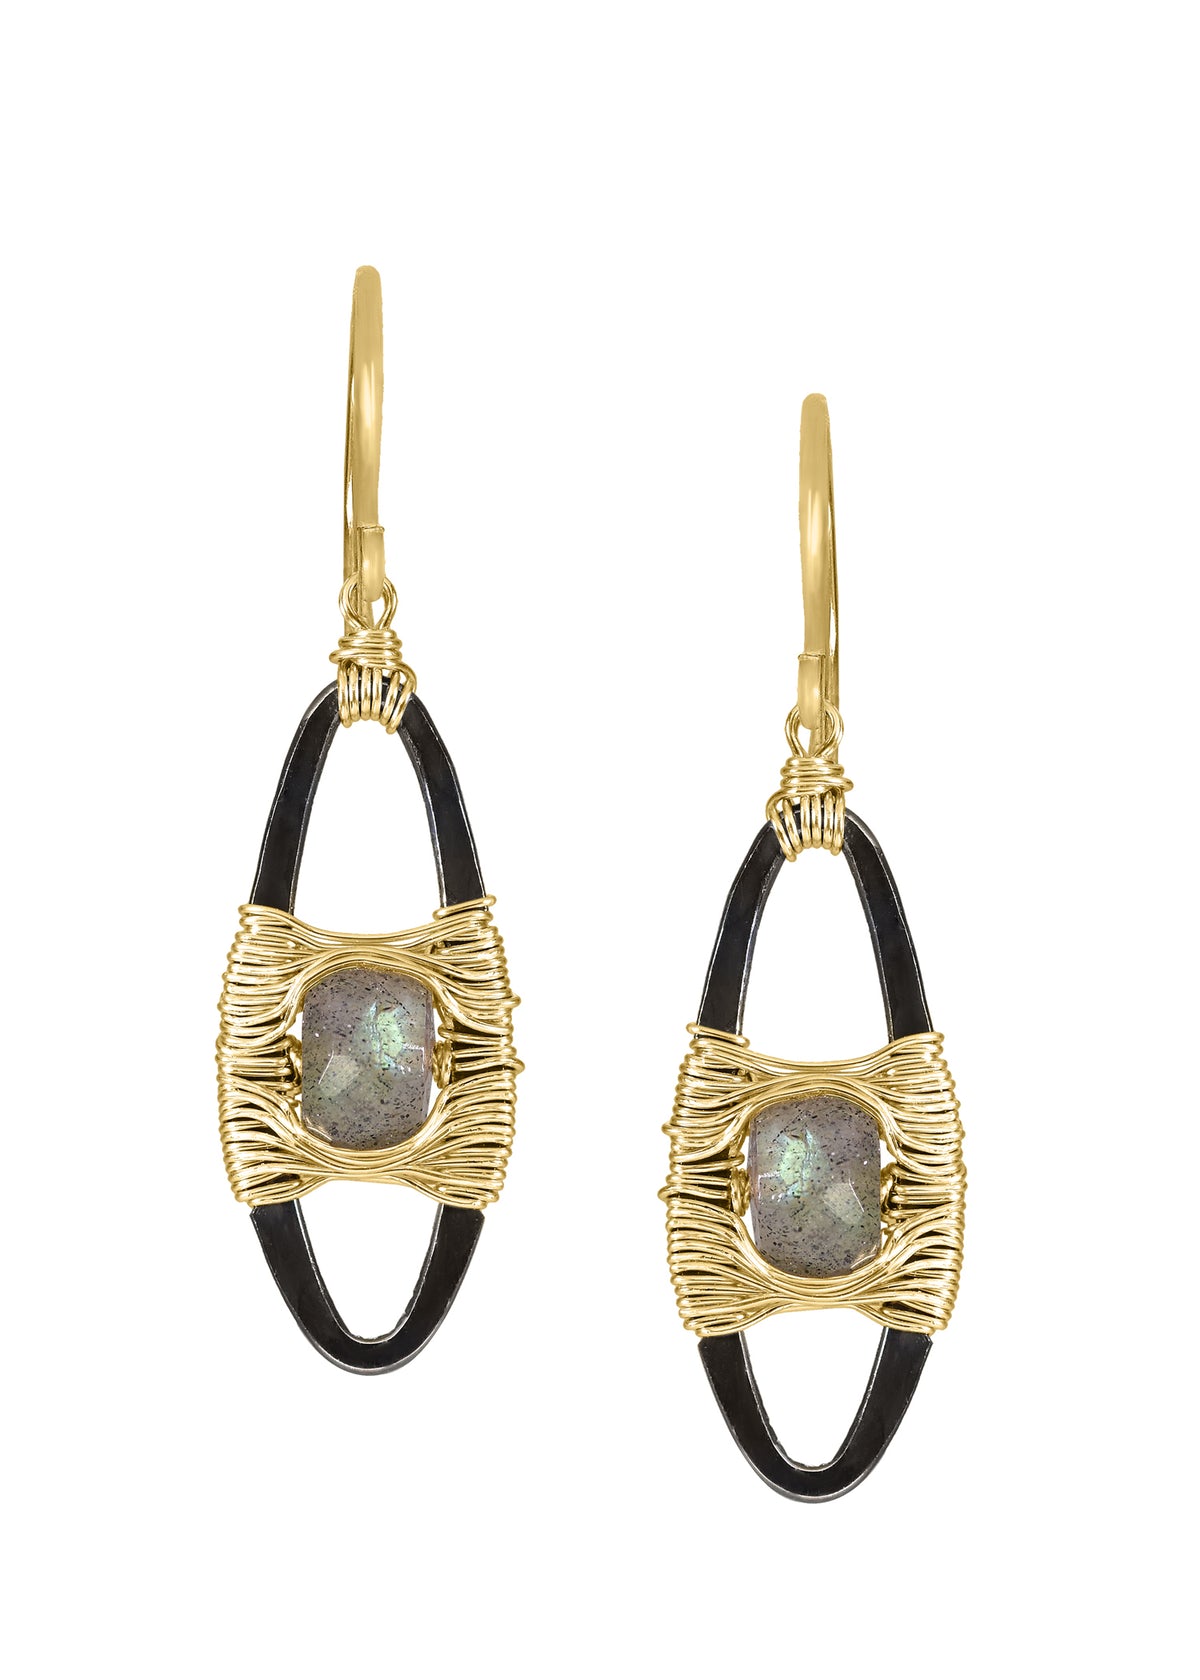 Labradorite 14k gold fill Sterling silver Mixed metal Earrings measure 1-1/4&quot; in length (including the ear wires) and 3/8&quot; in width at the widest point Handmade in our Los Angeles studio